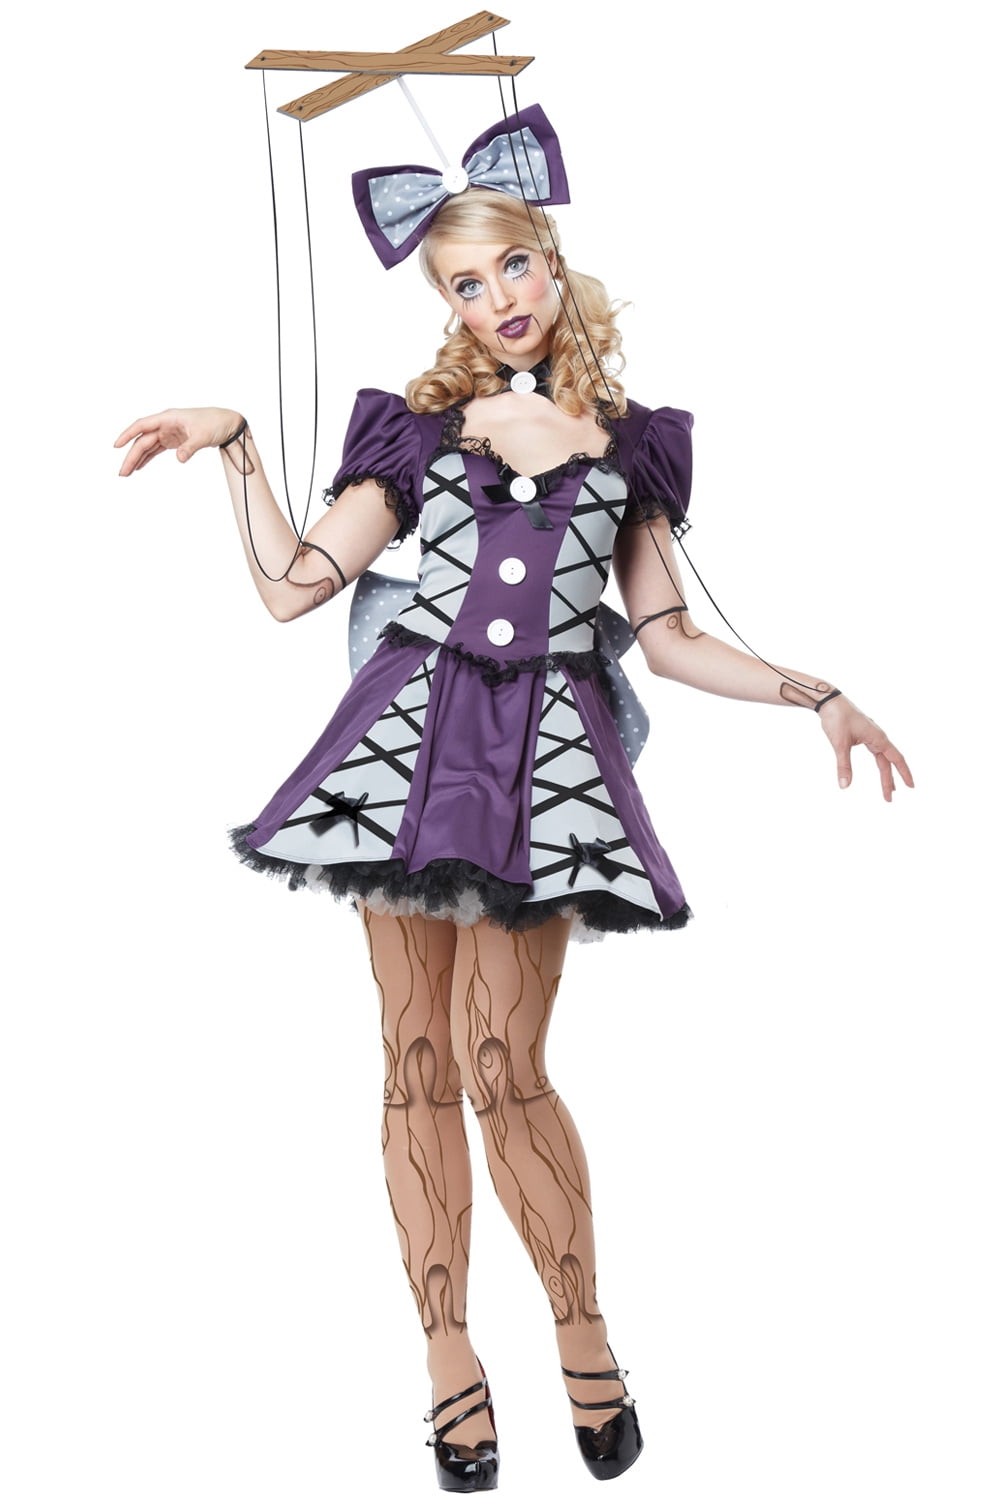 Buy Custom Marionette Puppet Costume, made to order from Anna G